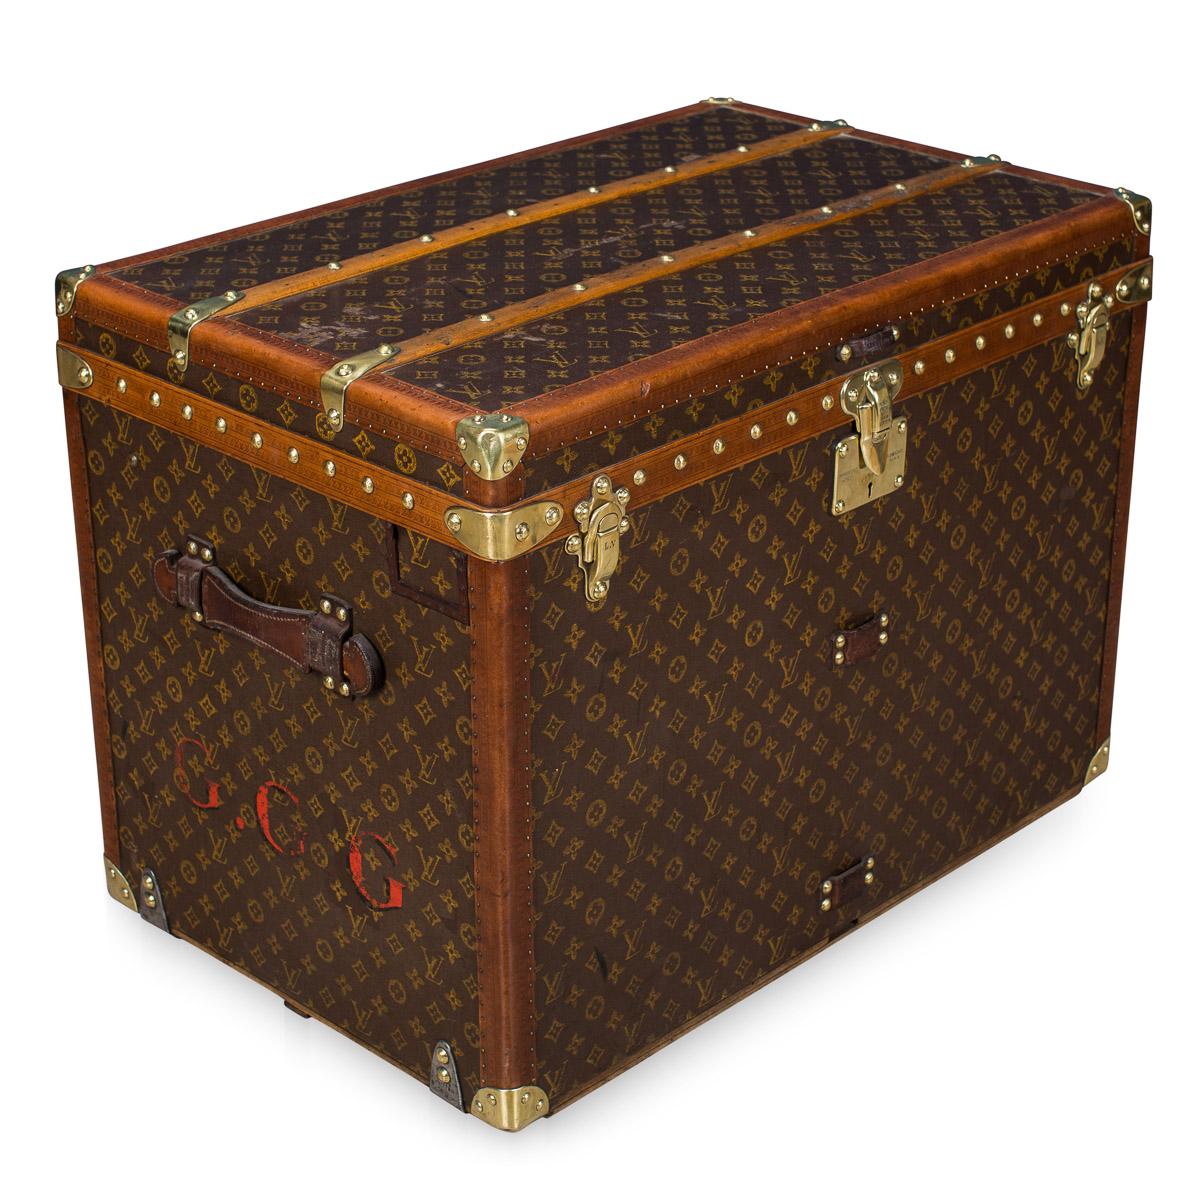 A stunning Louis Vuitton hat trunk in stencilled monogrammed canvas with lozine and brass trim, France, circa 1930. This trunk is a must have item for any elite traveller harking back to times of passenger ships and 1st class travel of bygone eras.